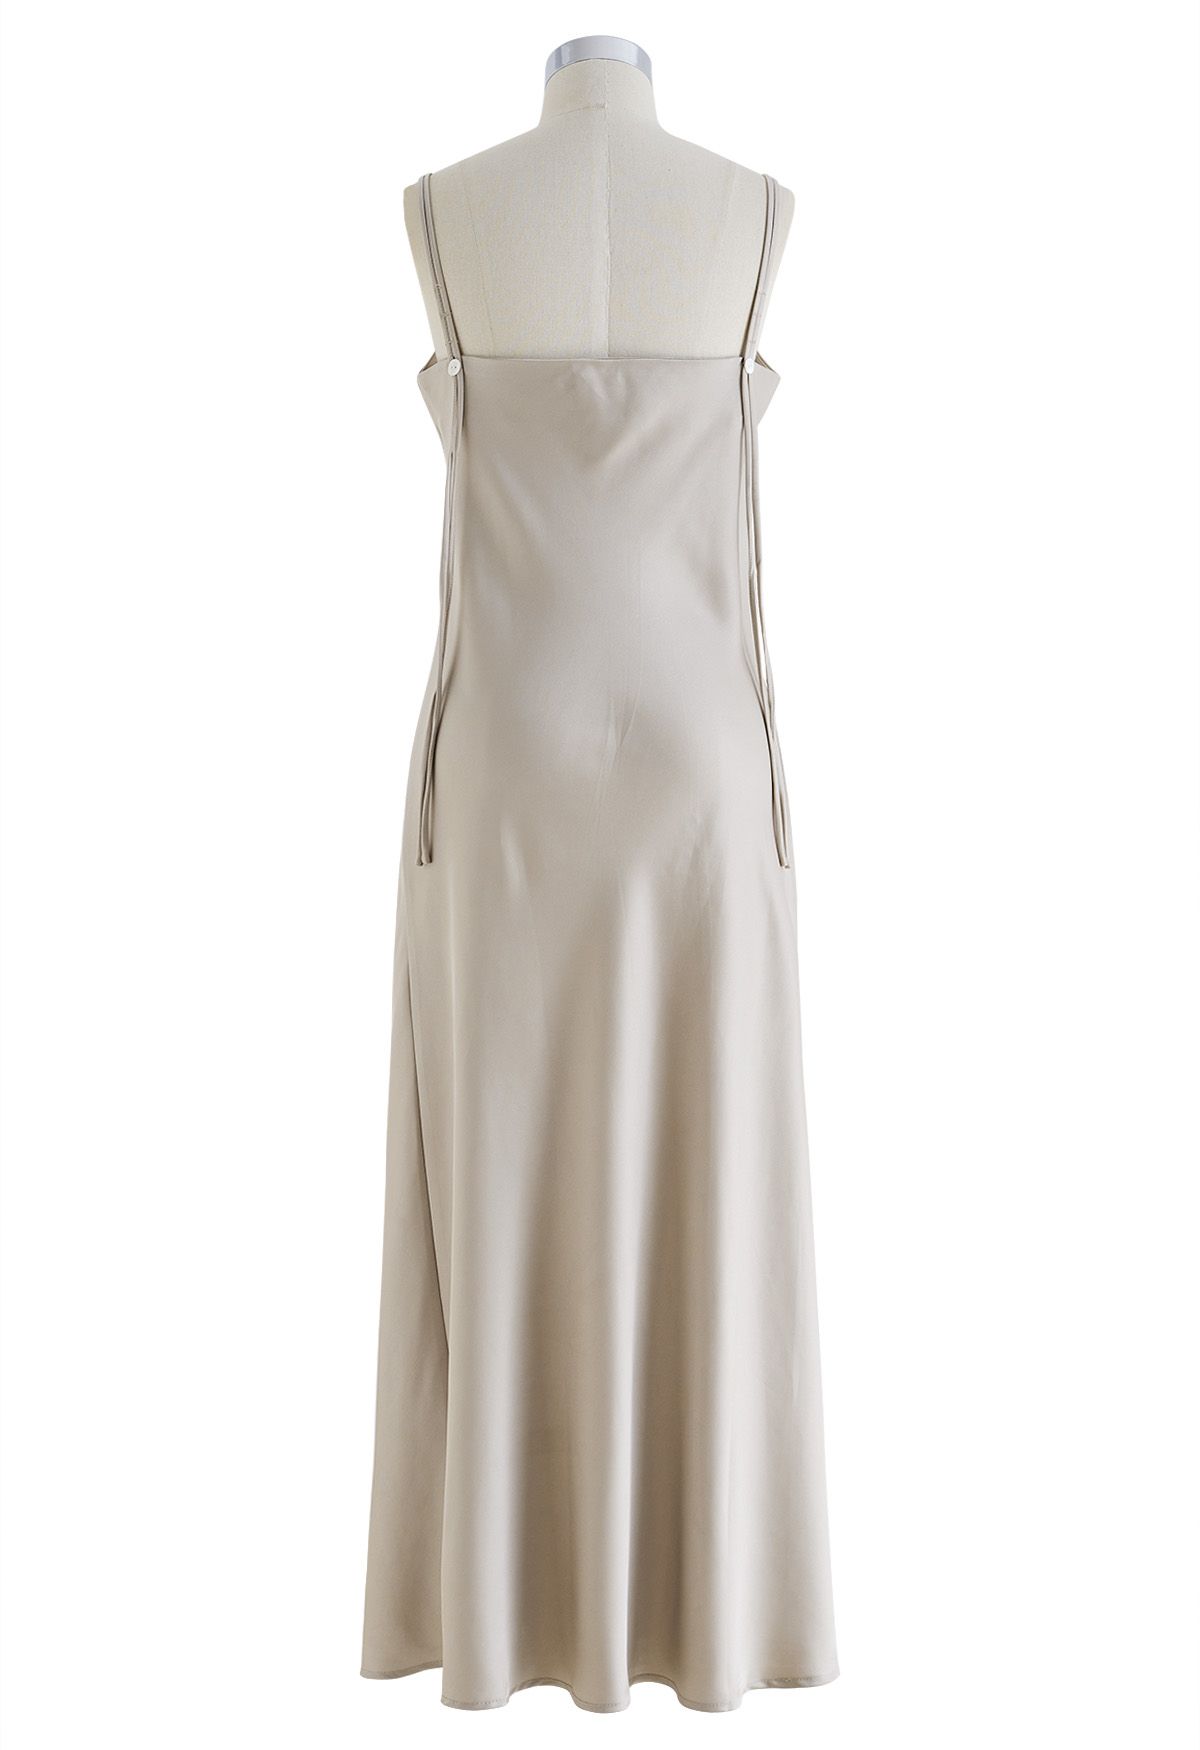 Double Straps Satin Cami Dress in Ivory